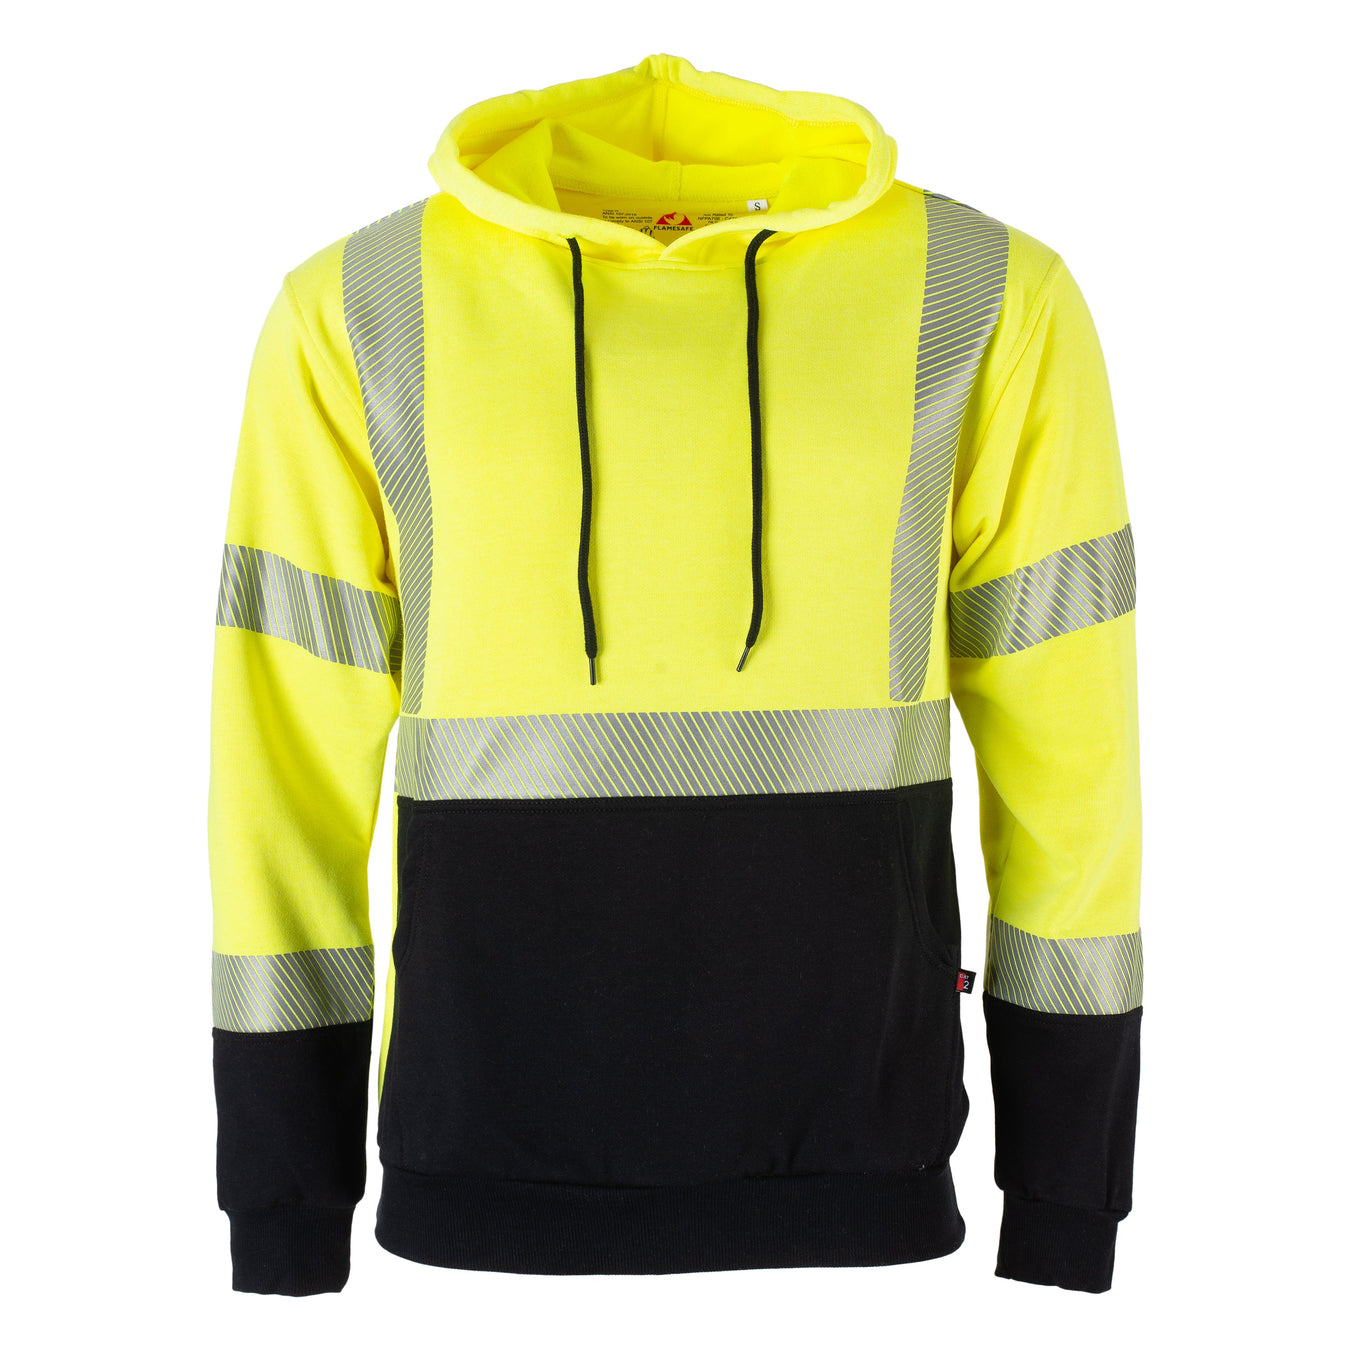 Flame Resistant Clothing, Fire Resistant Clothing